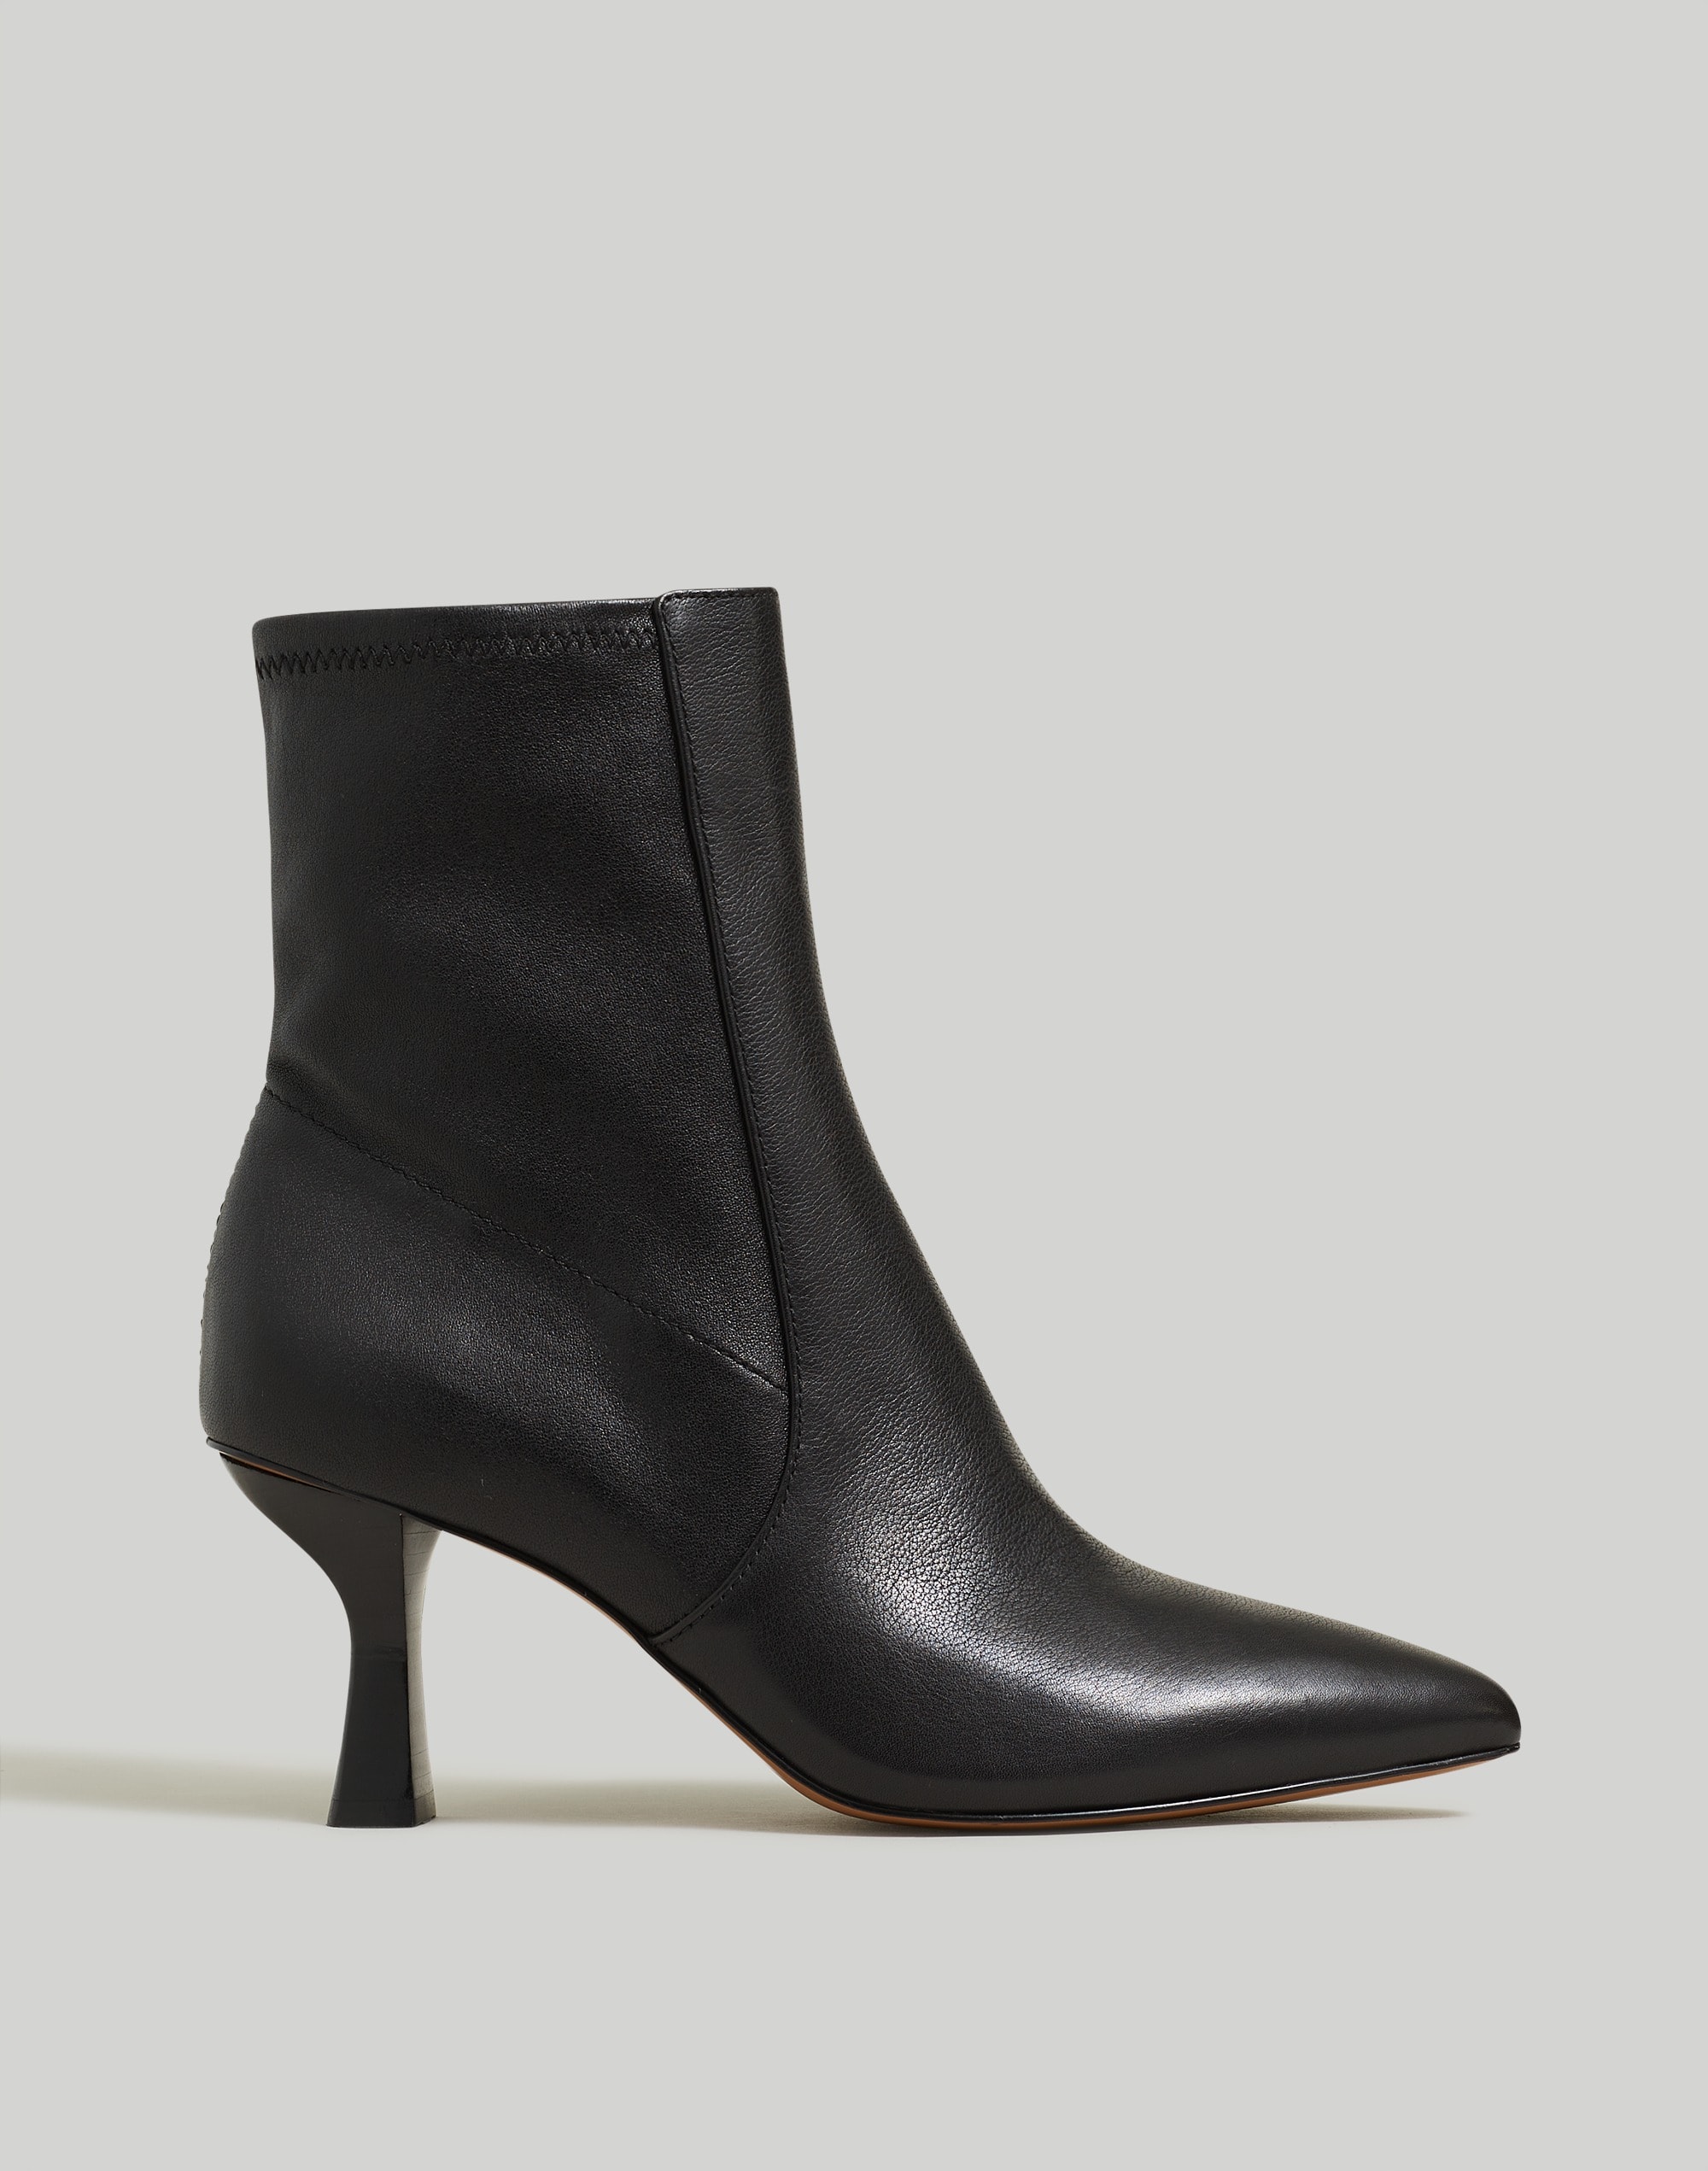 The Justine Ankle Boot Leather